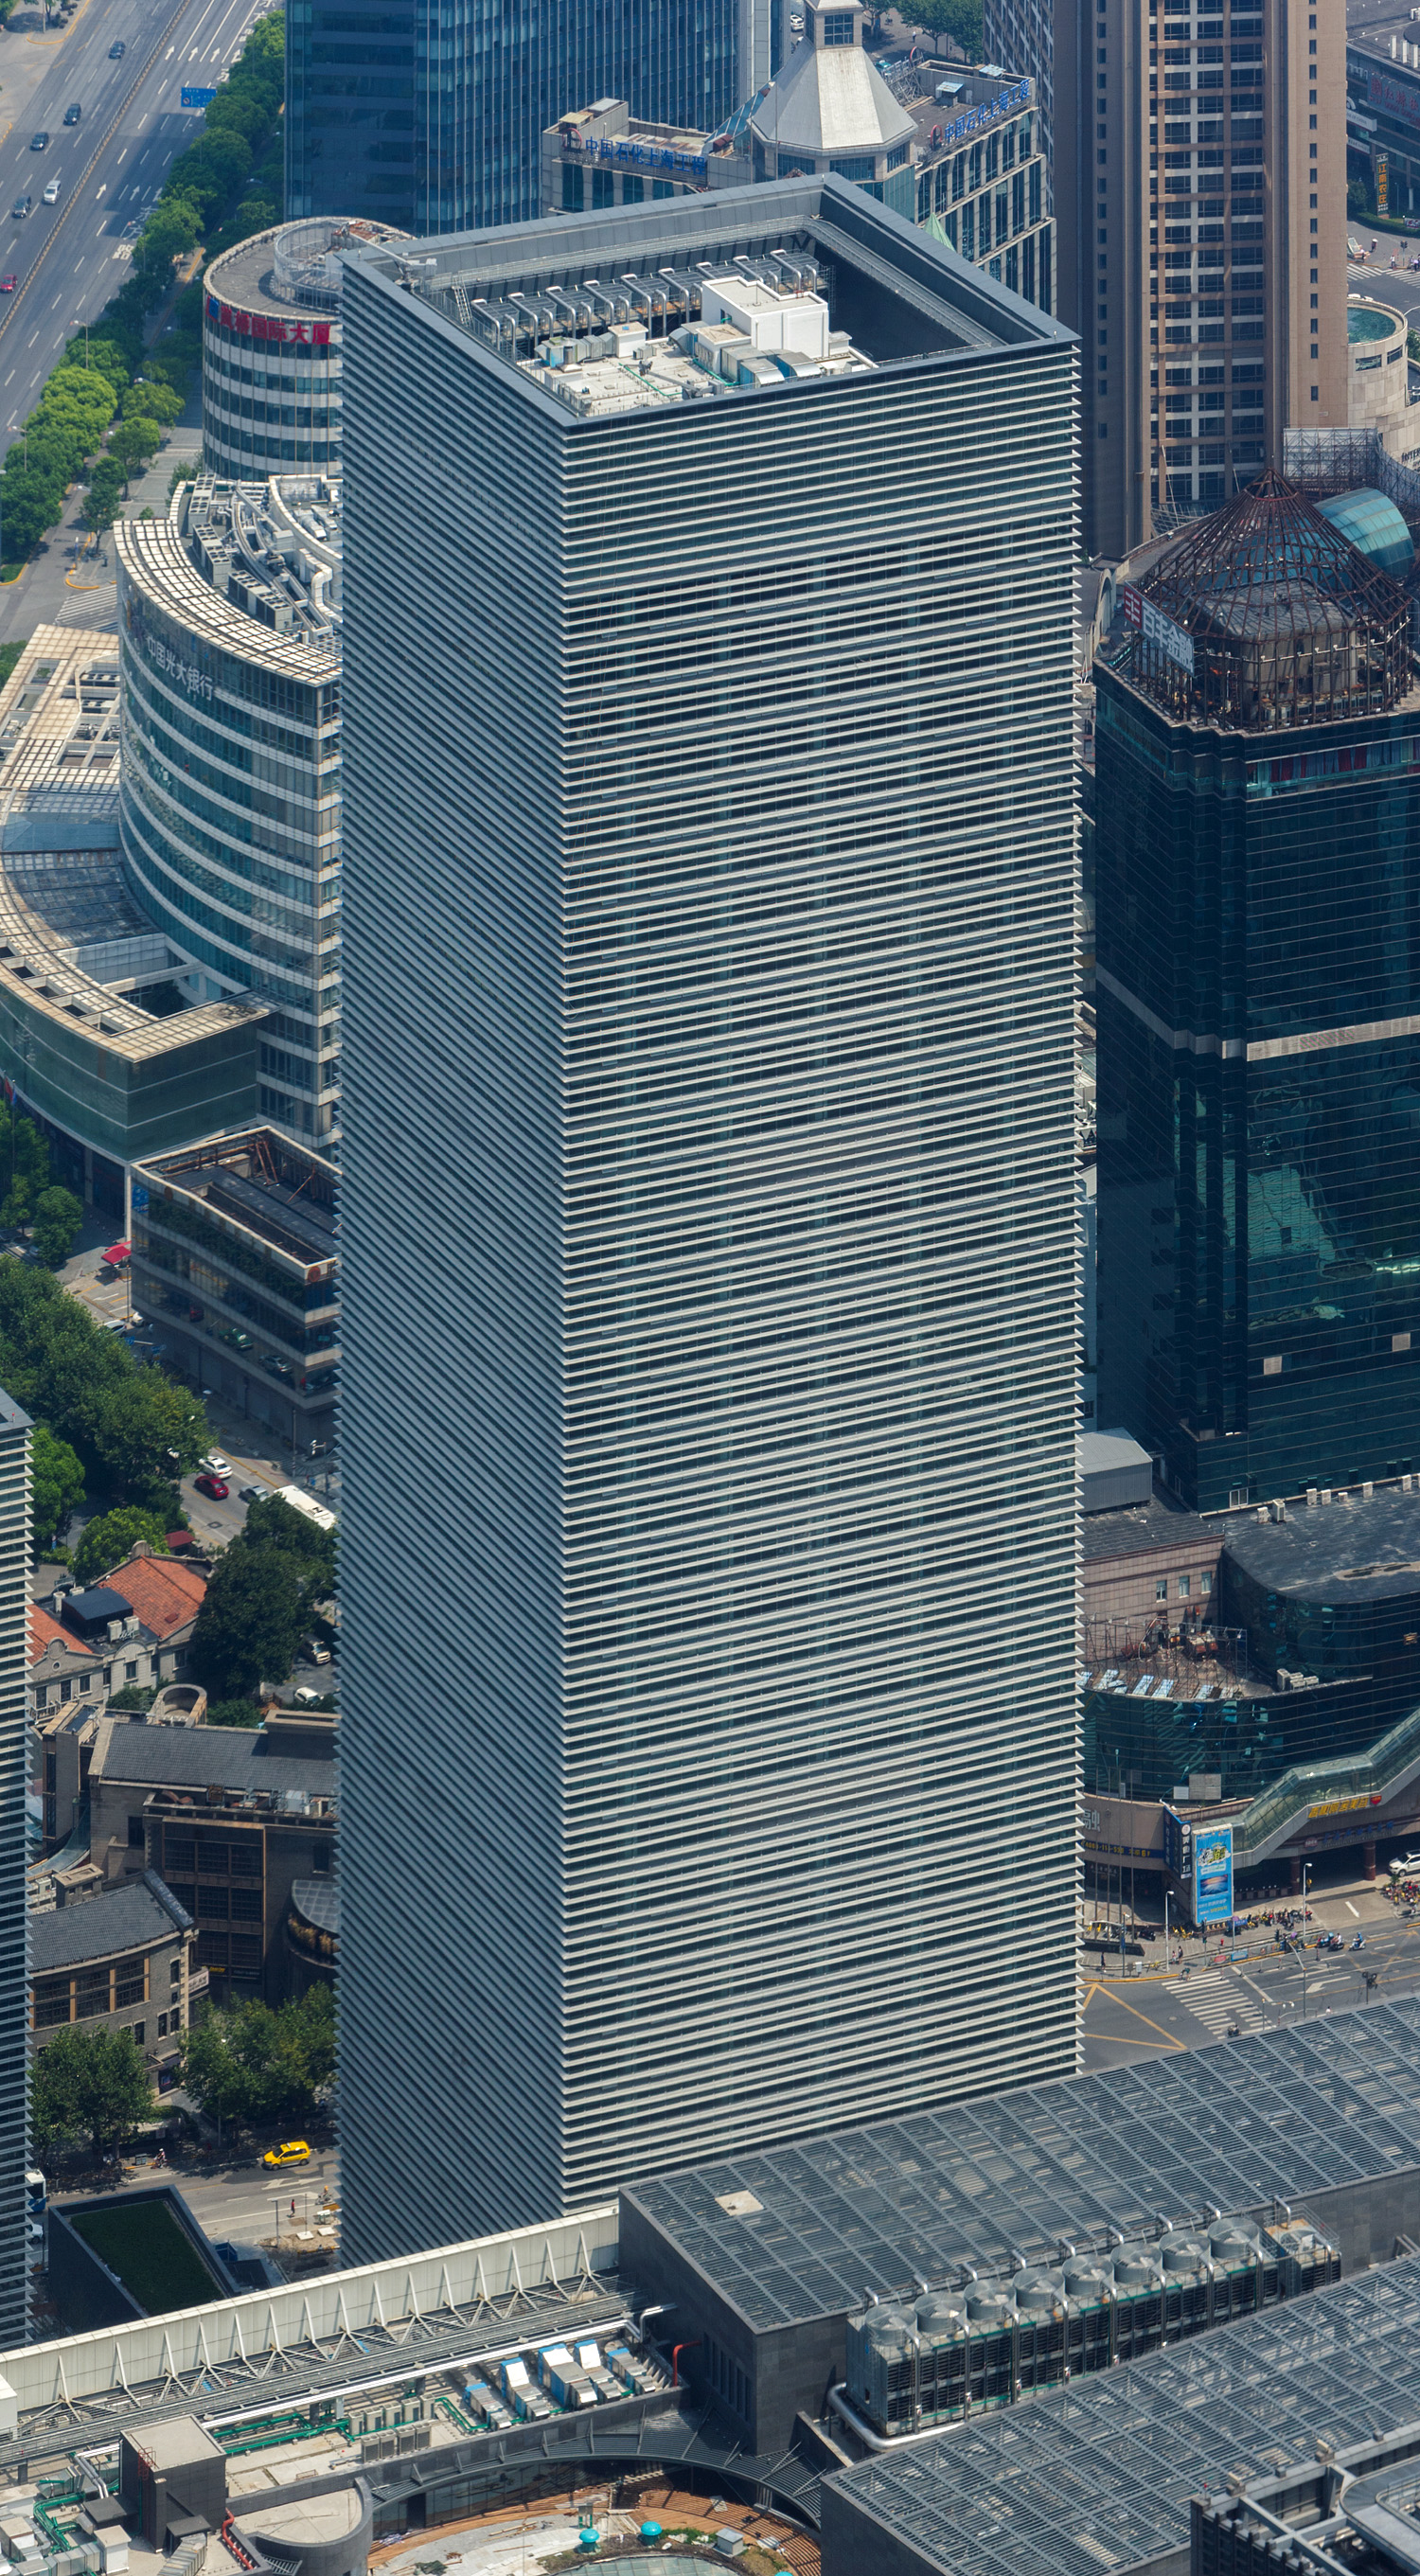 Pudong Financial Plaza Office Tower 1, Shanghai - View from Shanghai Tower. © Mathias Beinling